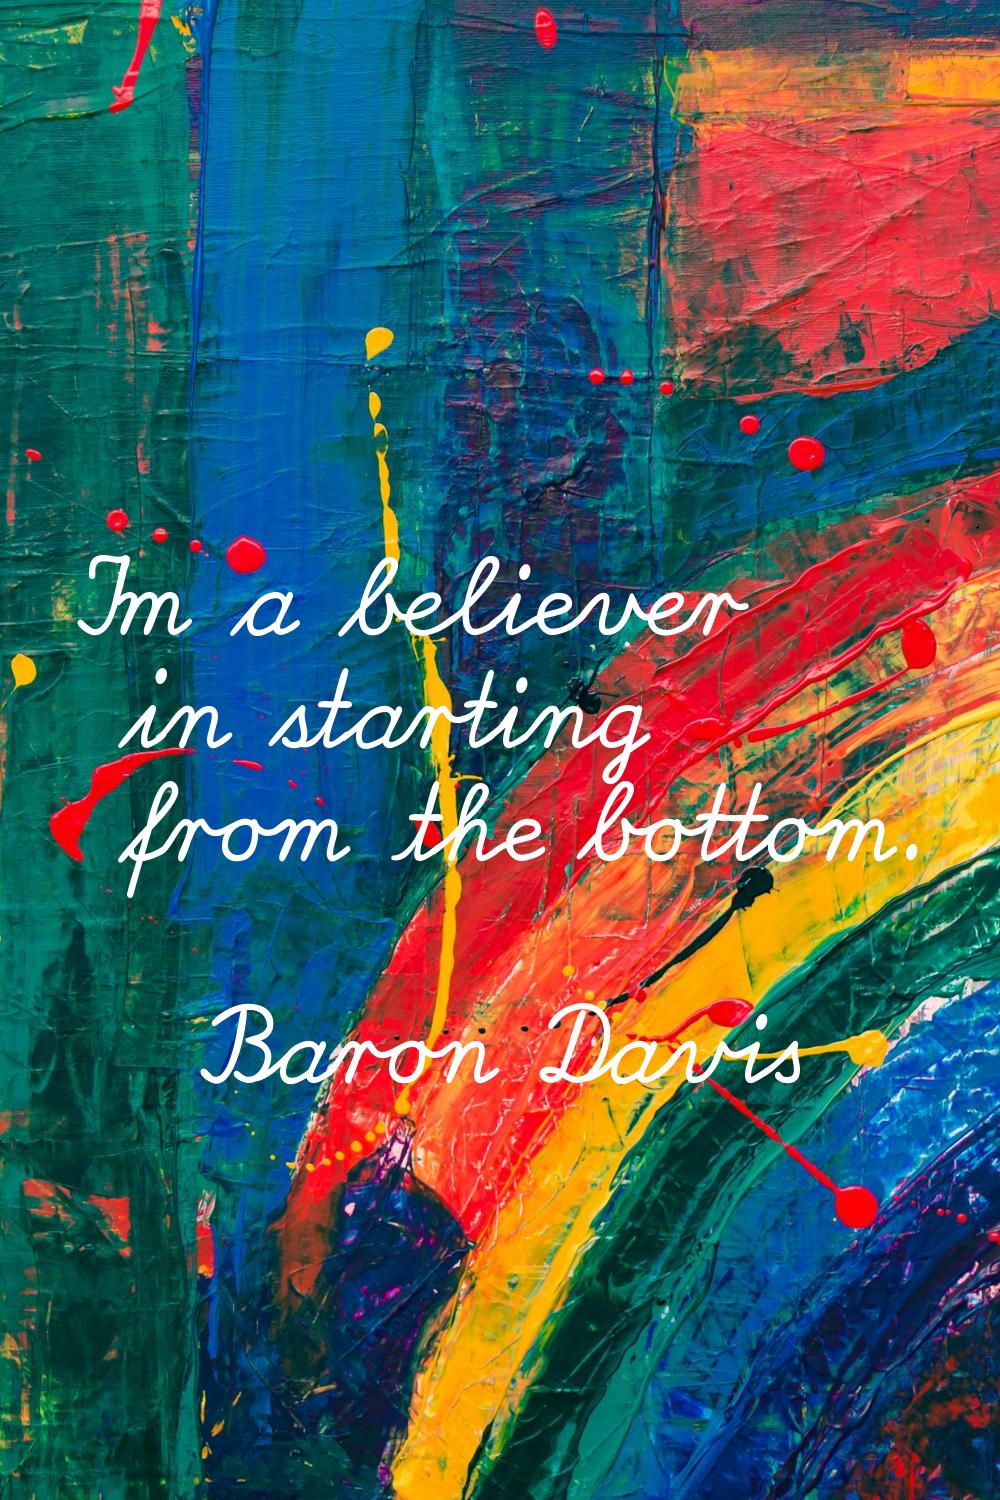 I'm a believer in starting from the bottom.